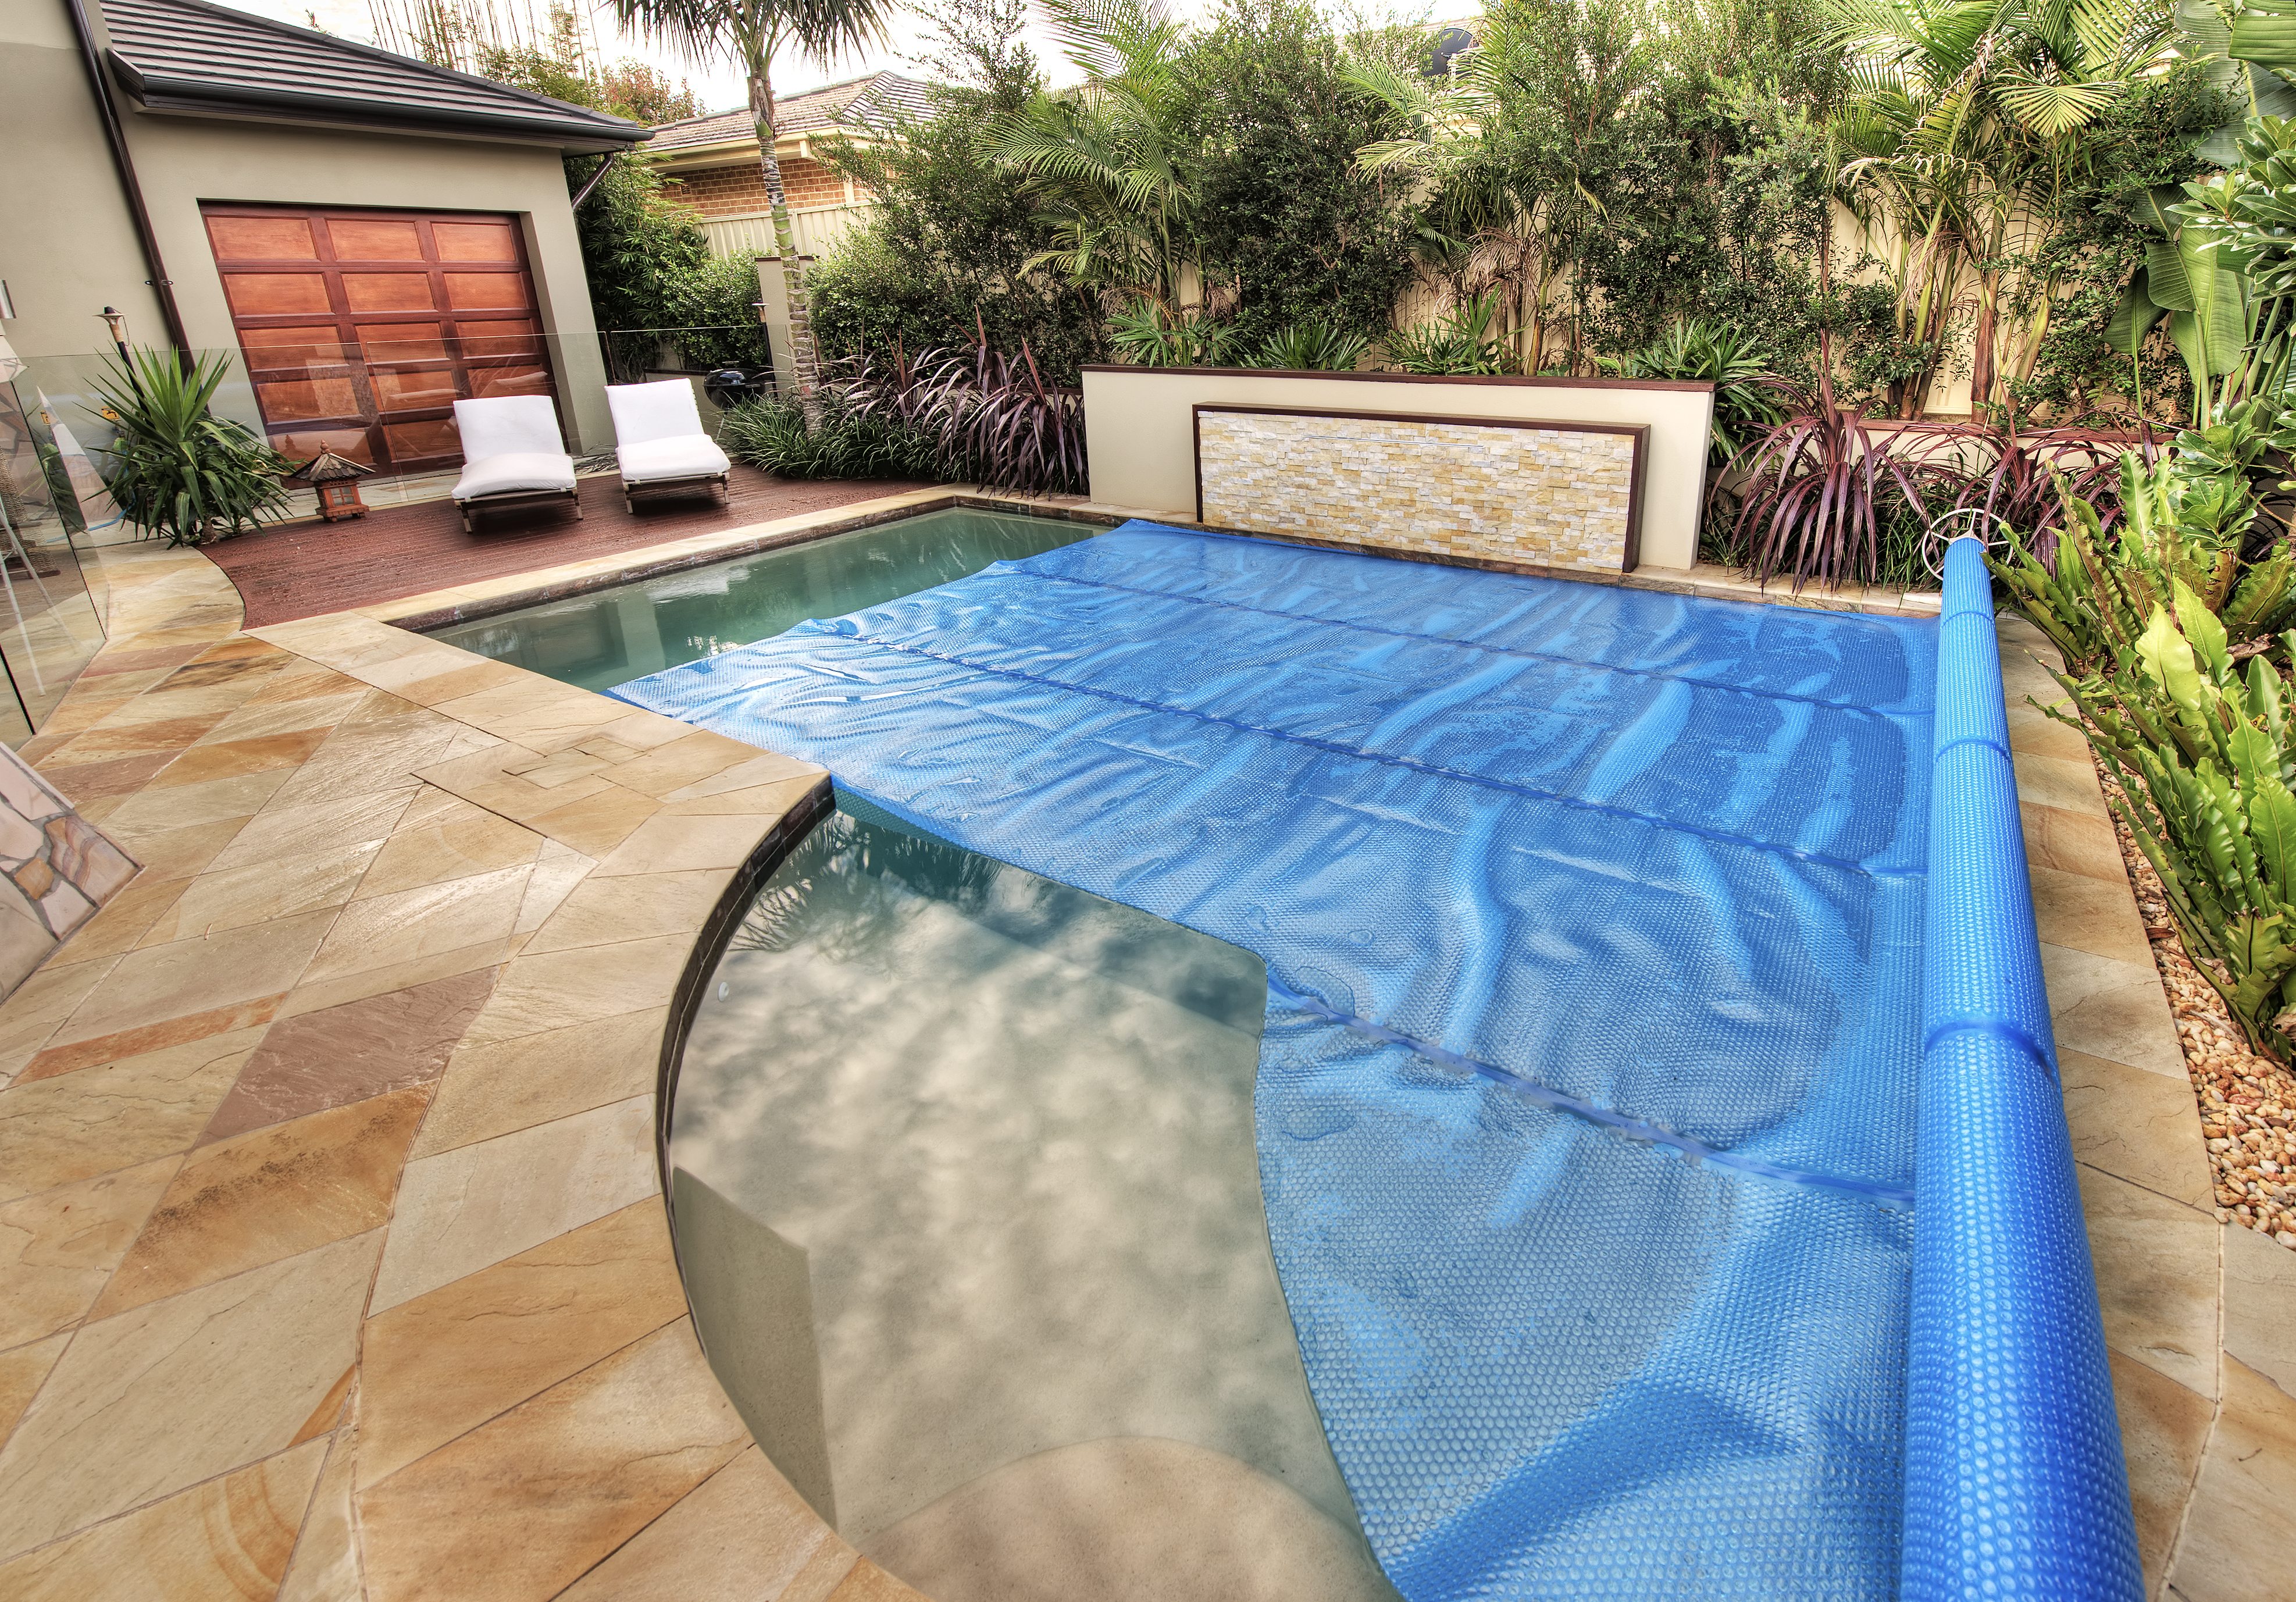 Pool Solar Blankets, Covers, and Rollers Perth